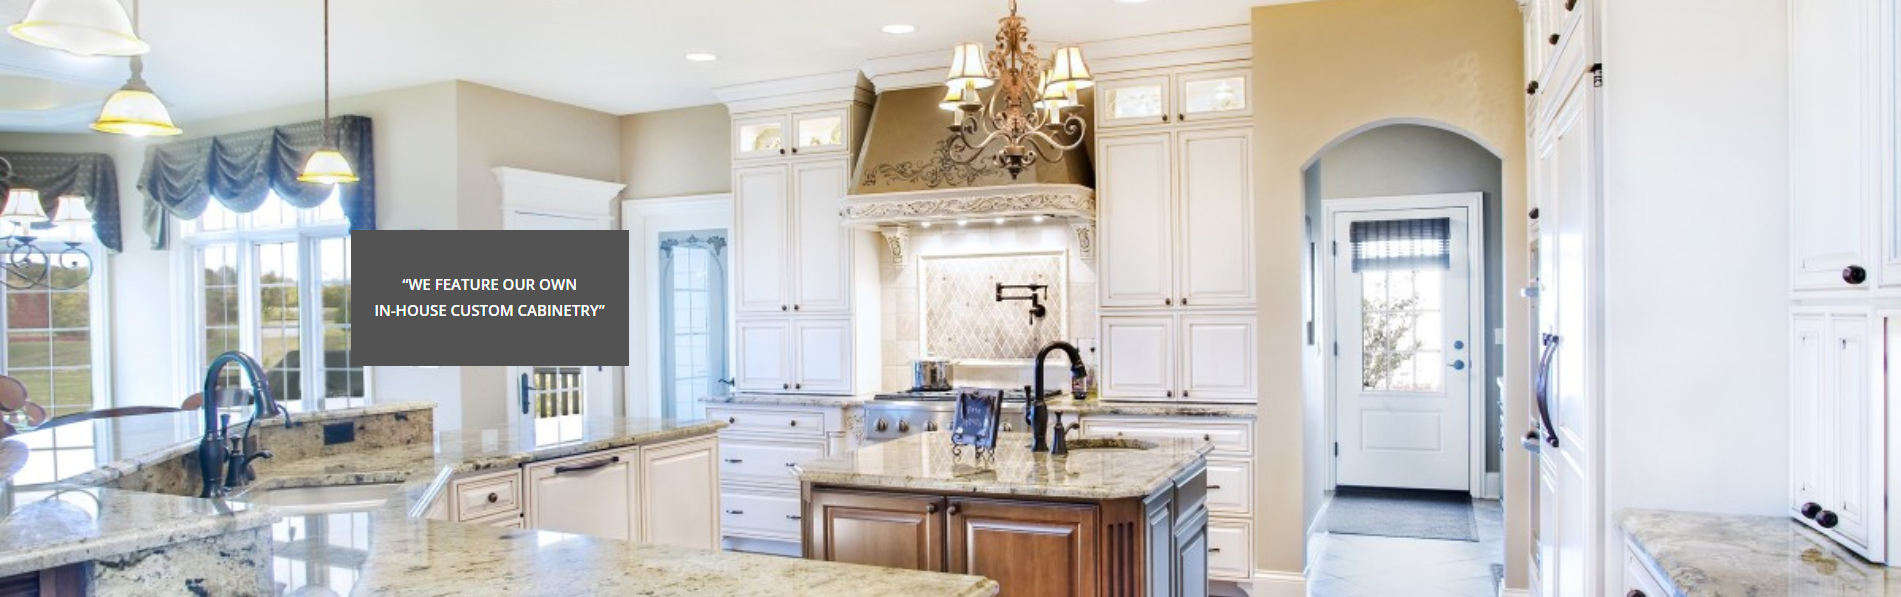 "WE FEATURE OUR OWN IN-HOUSE CUSTOM CABINETRY"